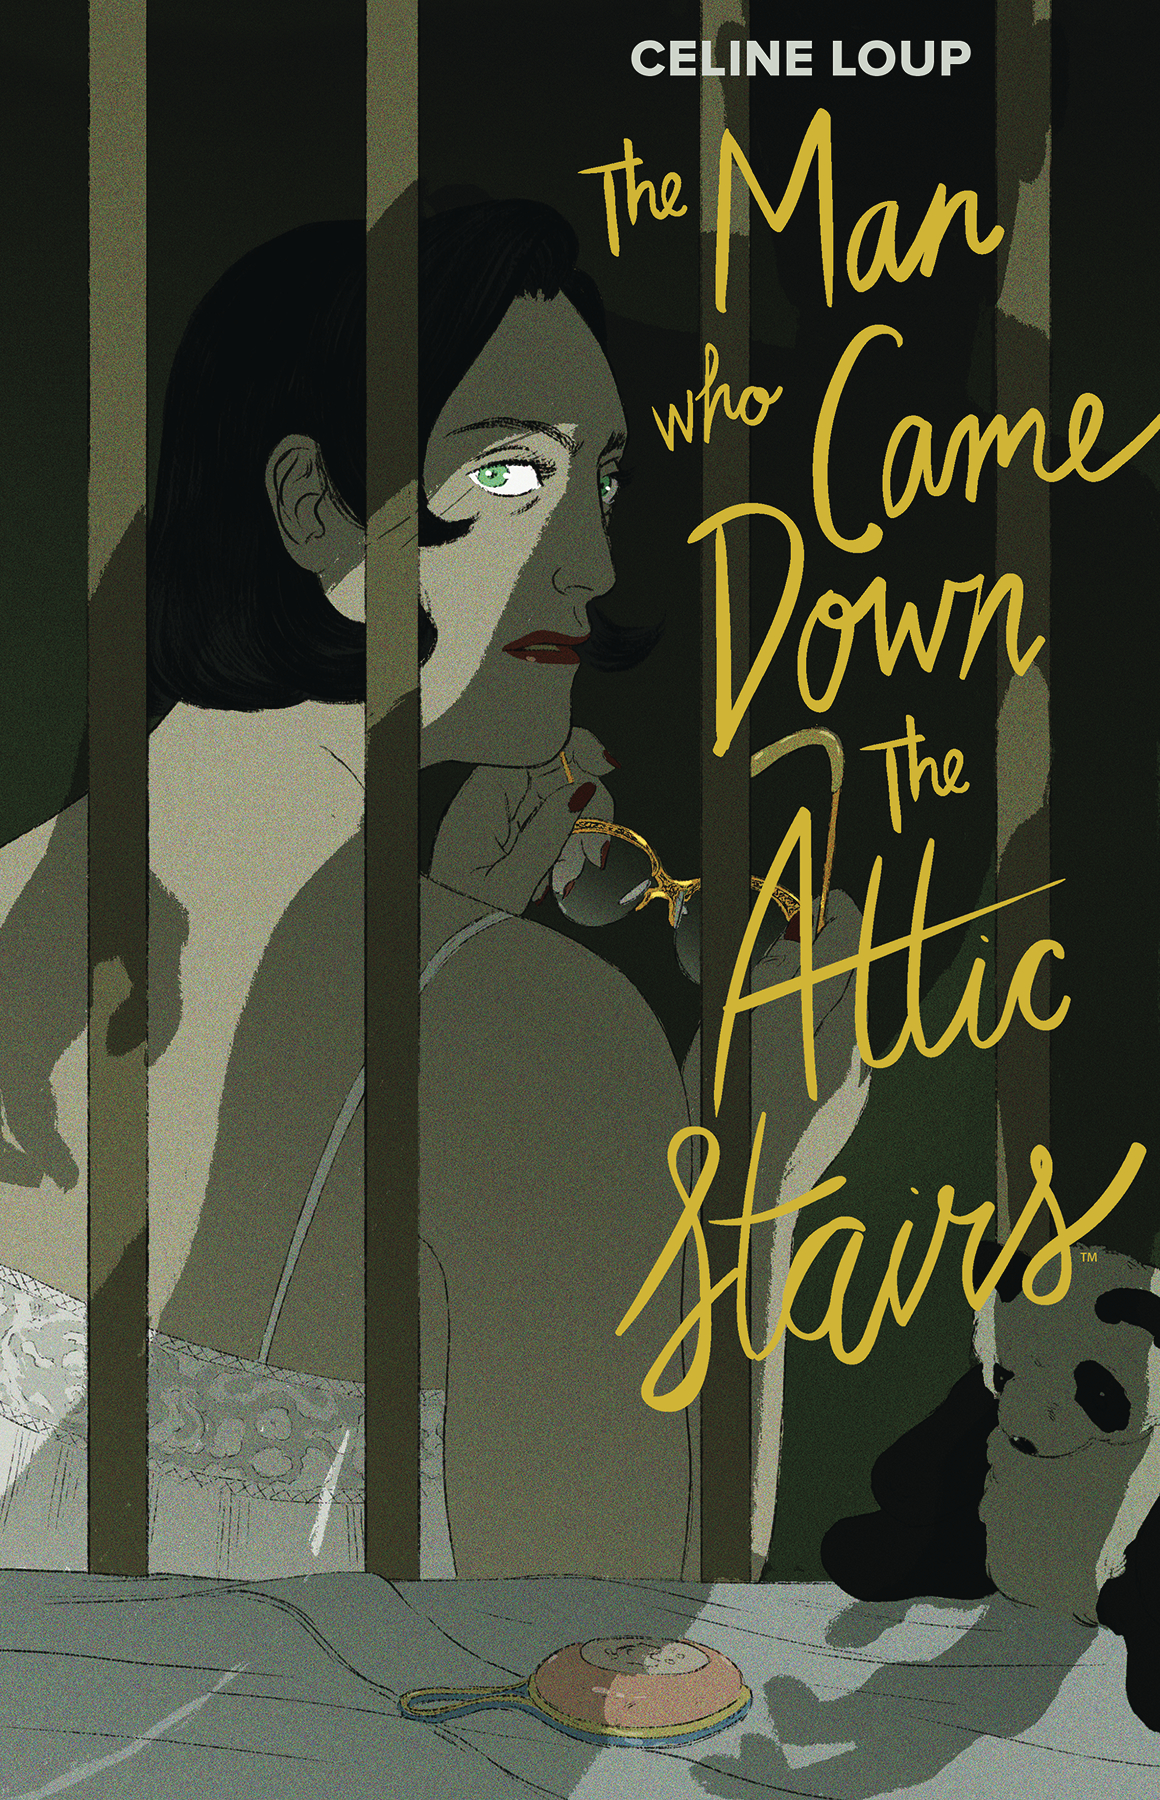 Graphic Novels for Fall 2019: The Man Who Came Down the Attic Stairs